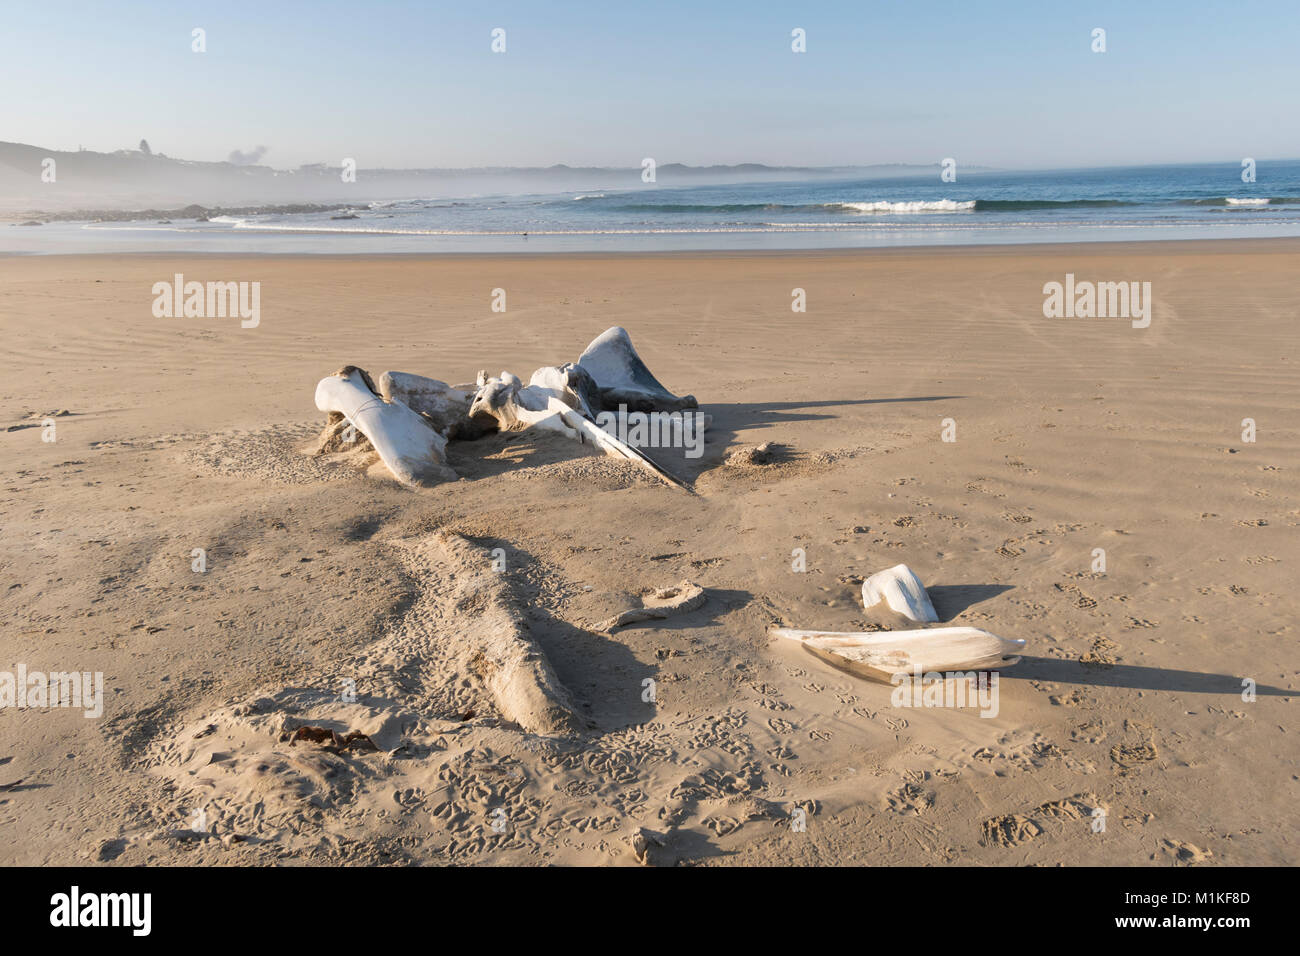 South Africa, Western Cape, the bones of a fin whale on the beach. Stock Photo